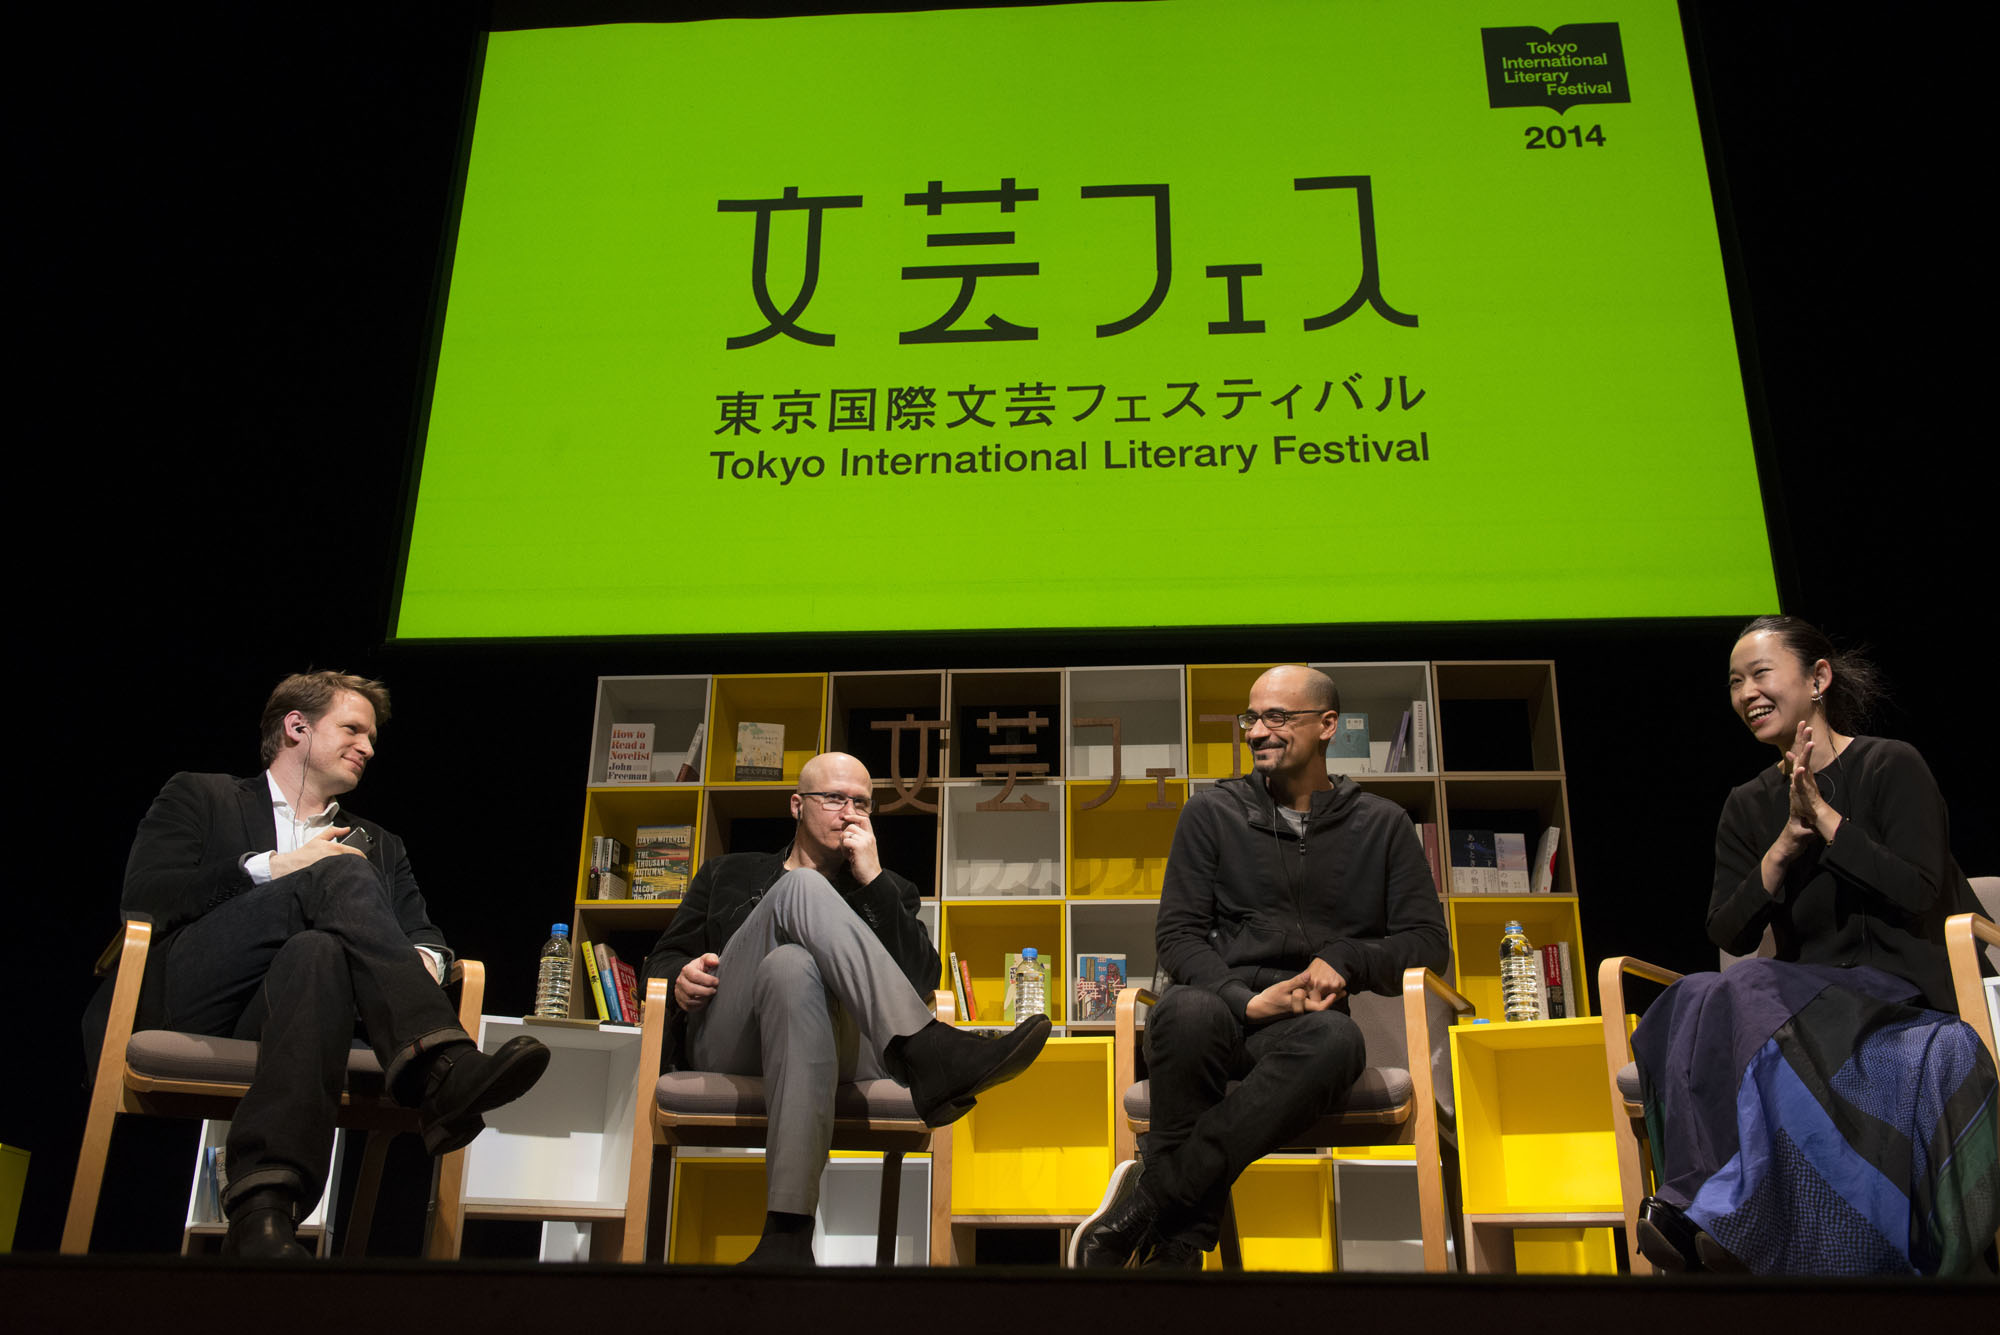 A new chapter: After a successful event in 2014 with a diverse range of speakers, including Junot Diaz (right) and Aleksandar Hemon (left), the Tokyo International Literary Festival was forced to take a one-year hiatus. Helmed by a new team, the festival will return in 2016 with a strong lineup of speakers. | COURTESY OF THE TOKYO INTERNATIONAL LITERARY FESTIVAL